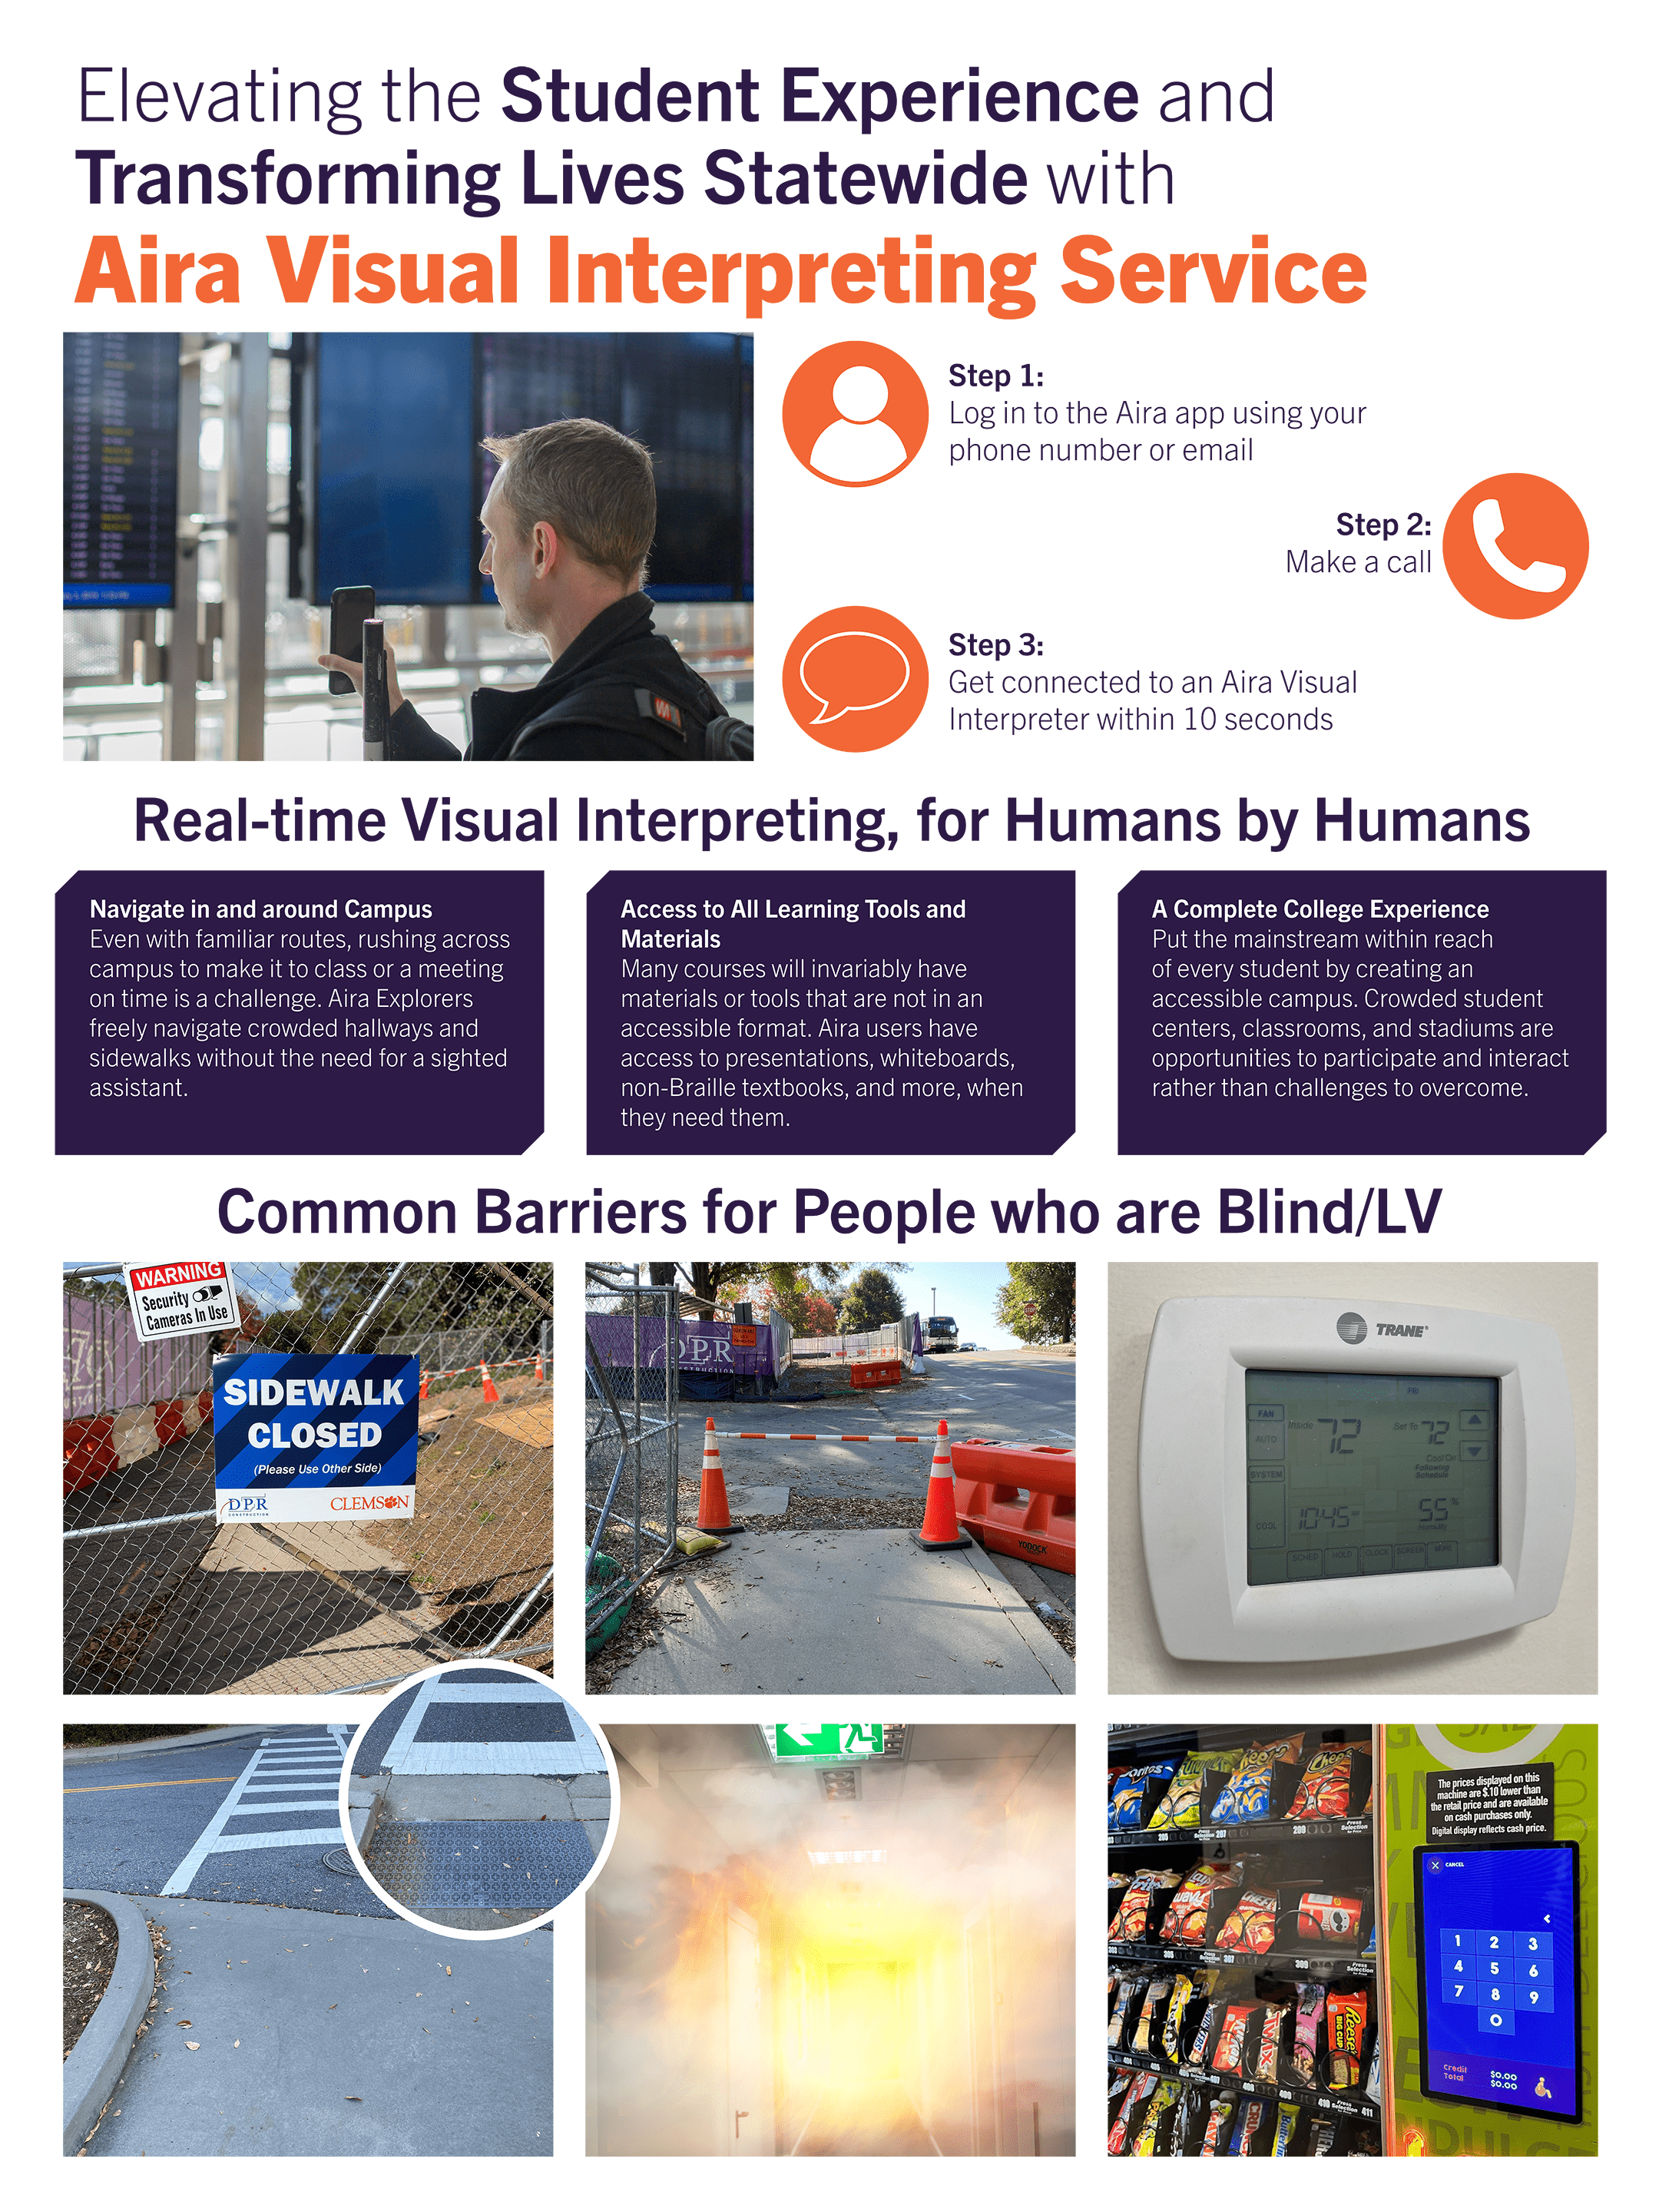 A flyer advertising the Aira Visual Interpreting Service. See image description.